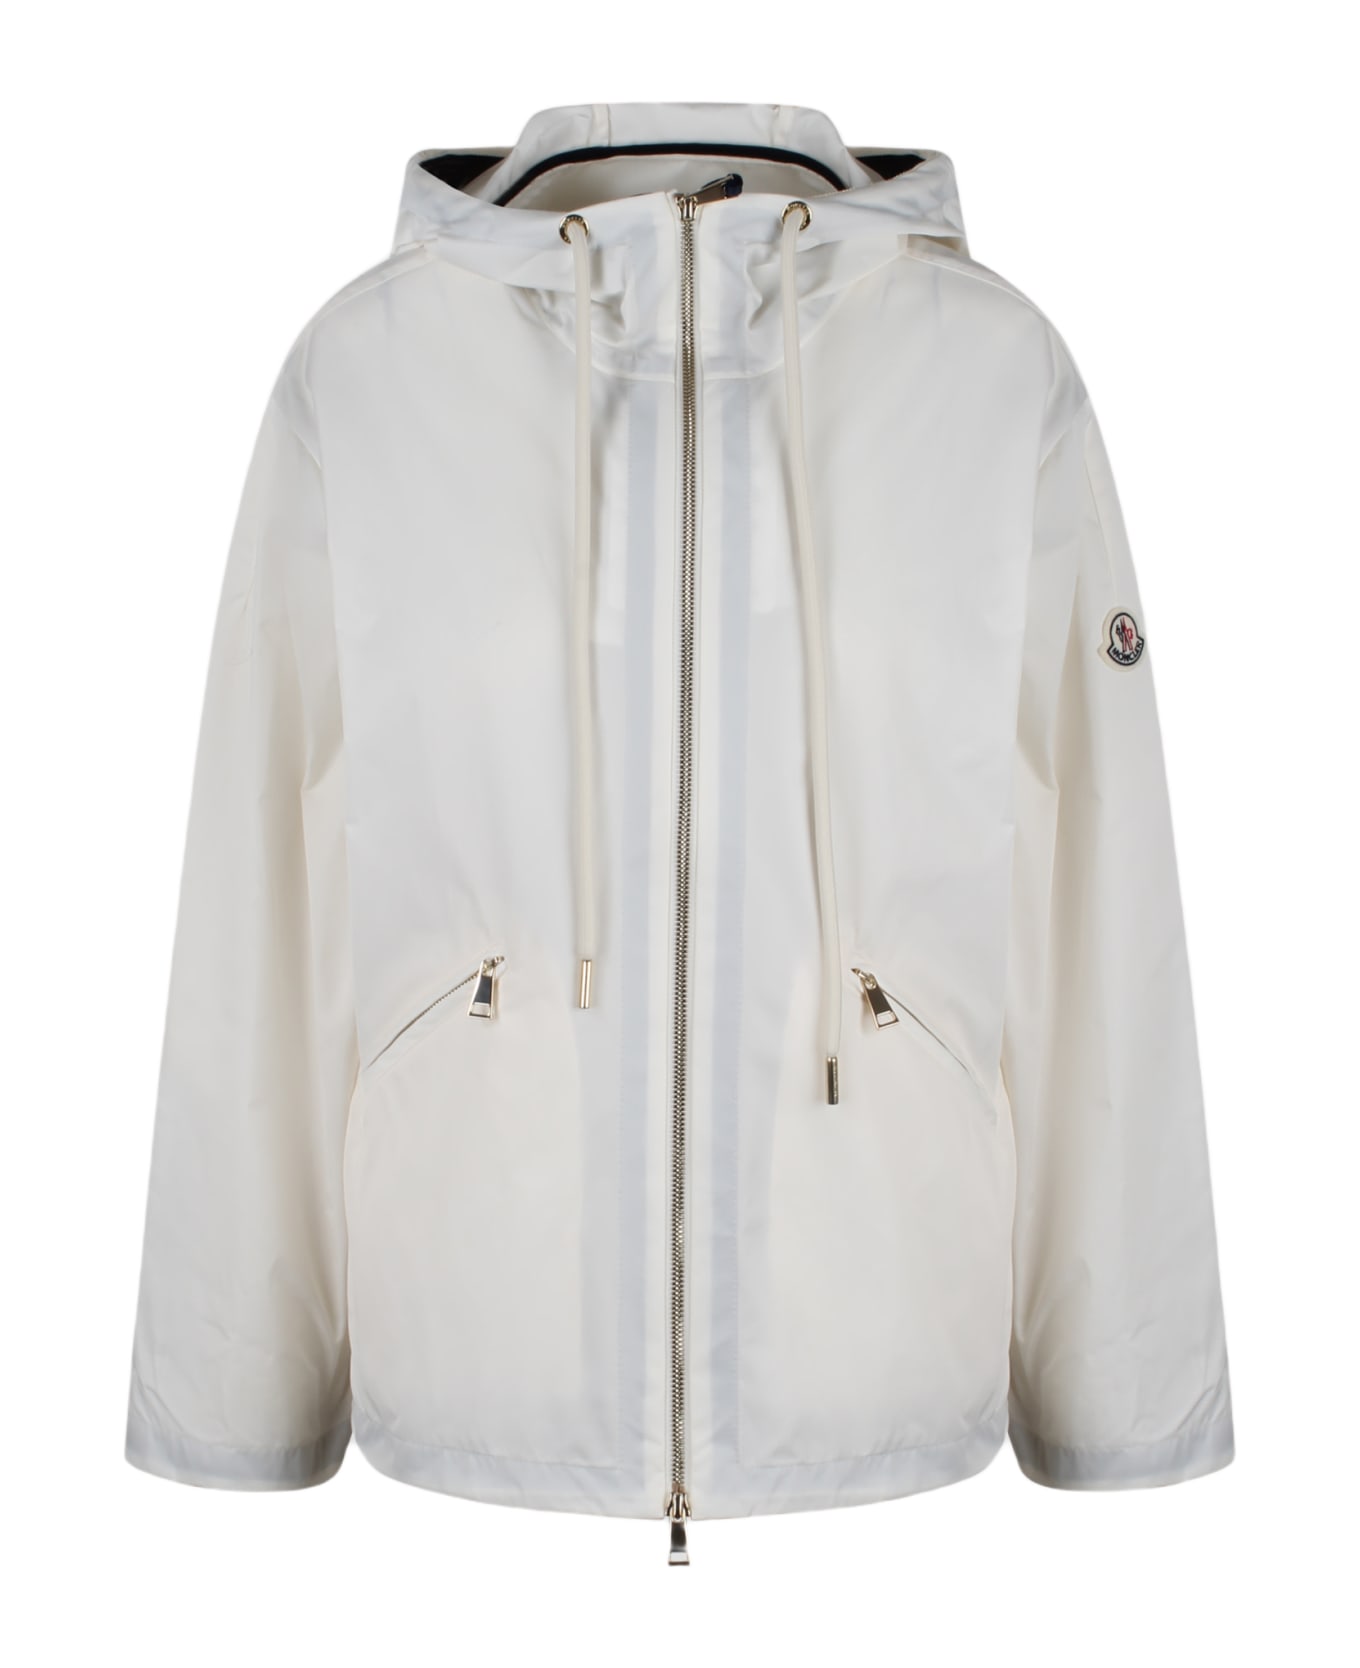 Moncler Cassiopea Hooded Jacket - White ジャケット